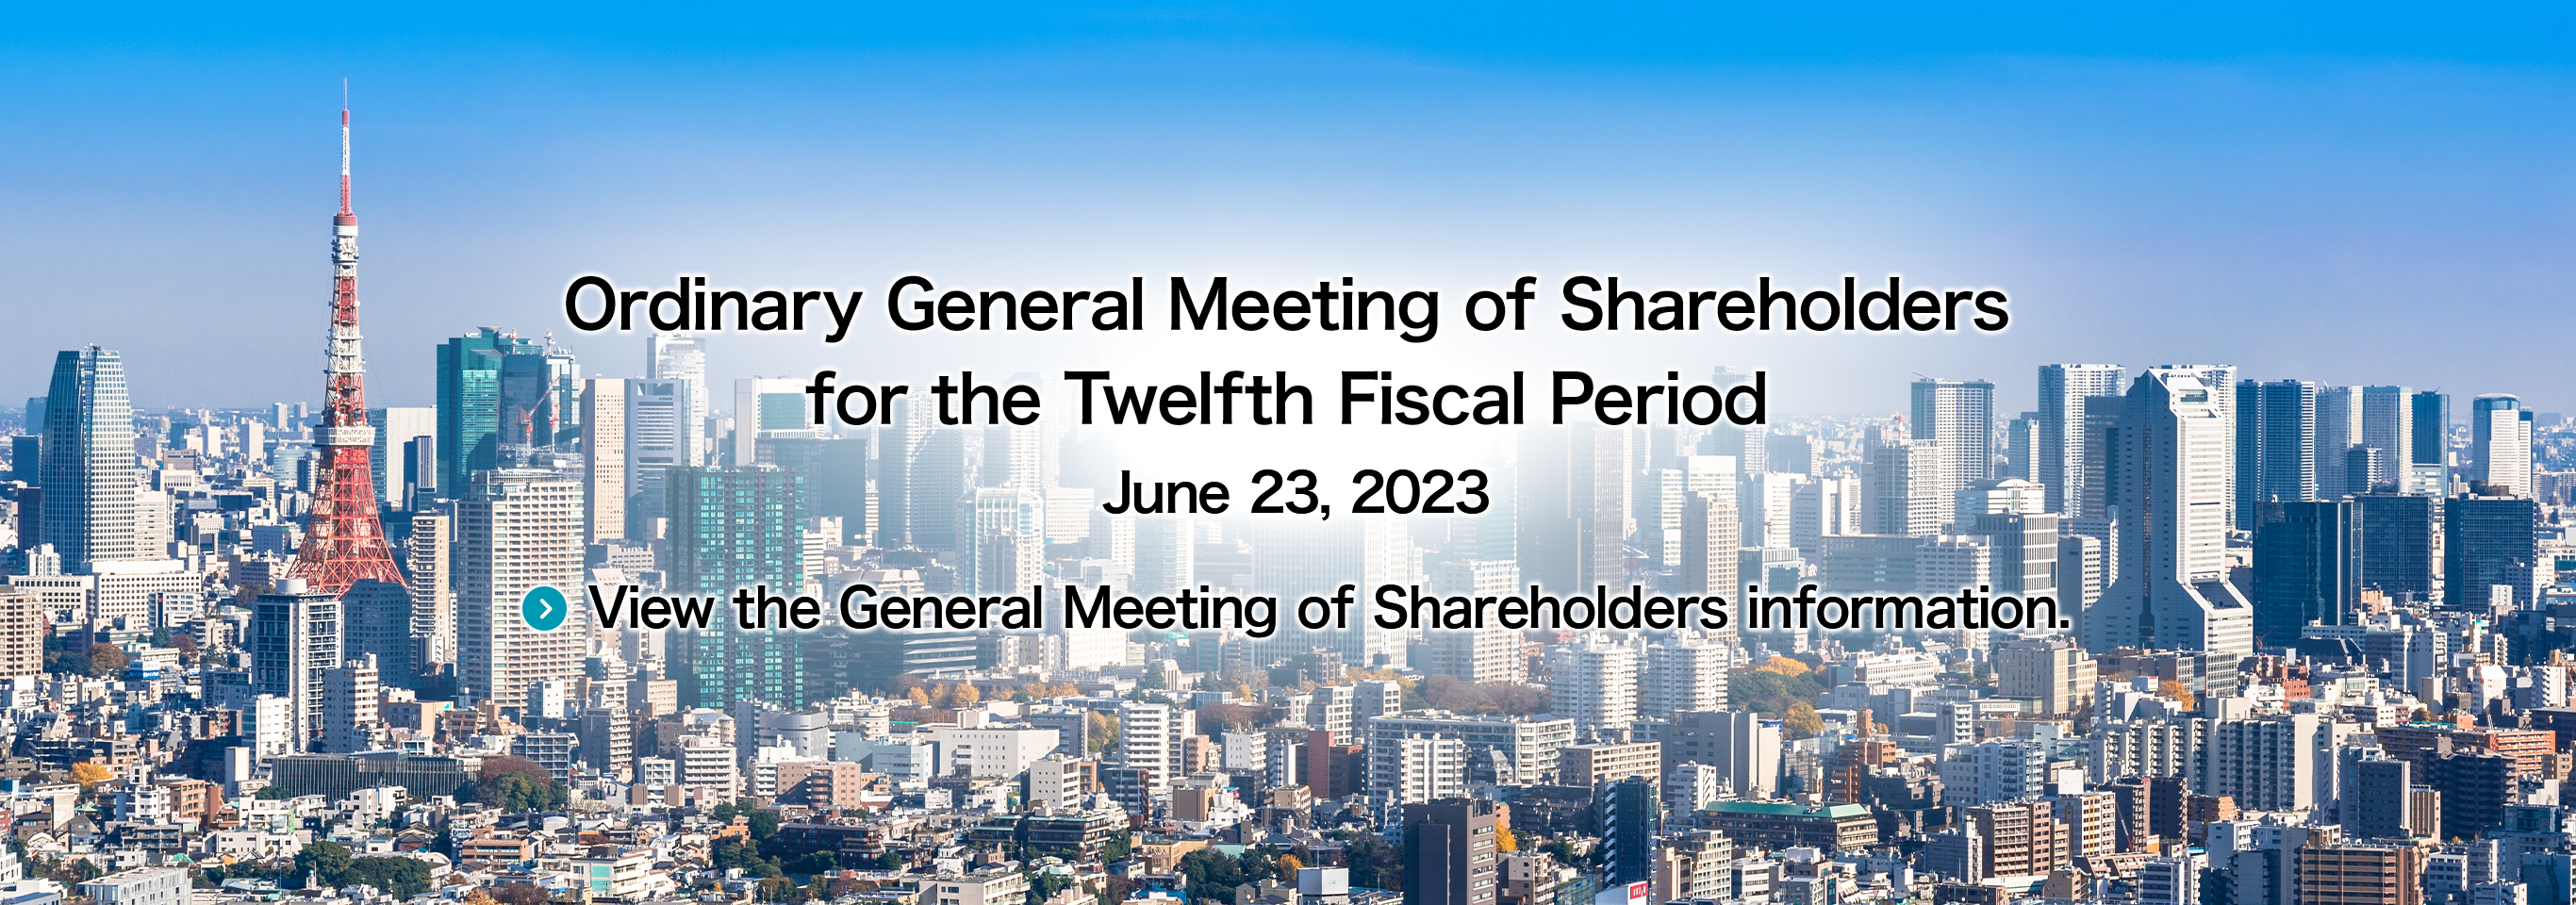 Ordinary General Meeting of Shareholders for the 10th Fiscal Period June 23, 2021 View the General Meeting of Shareholders information.